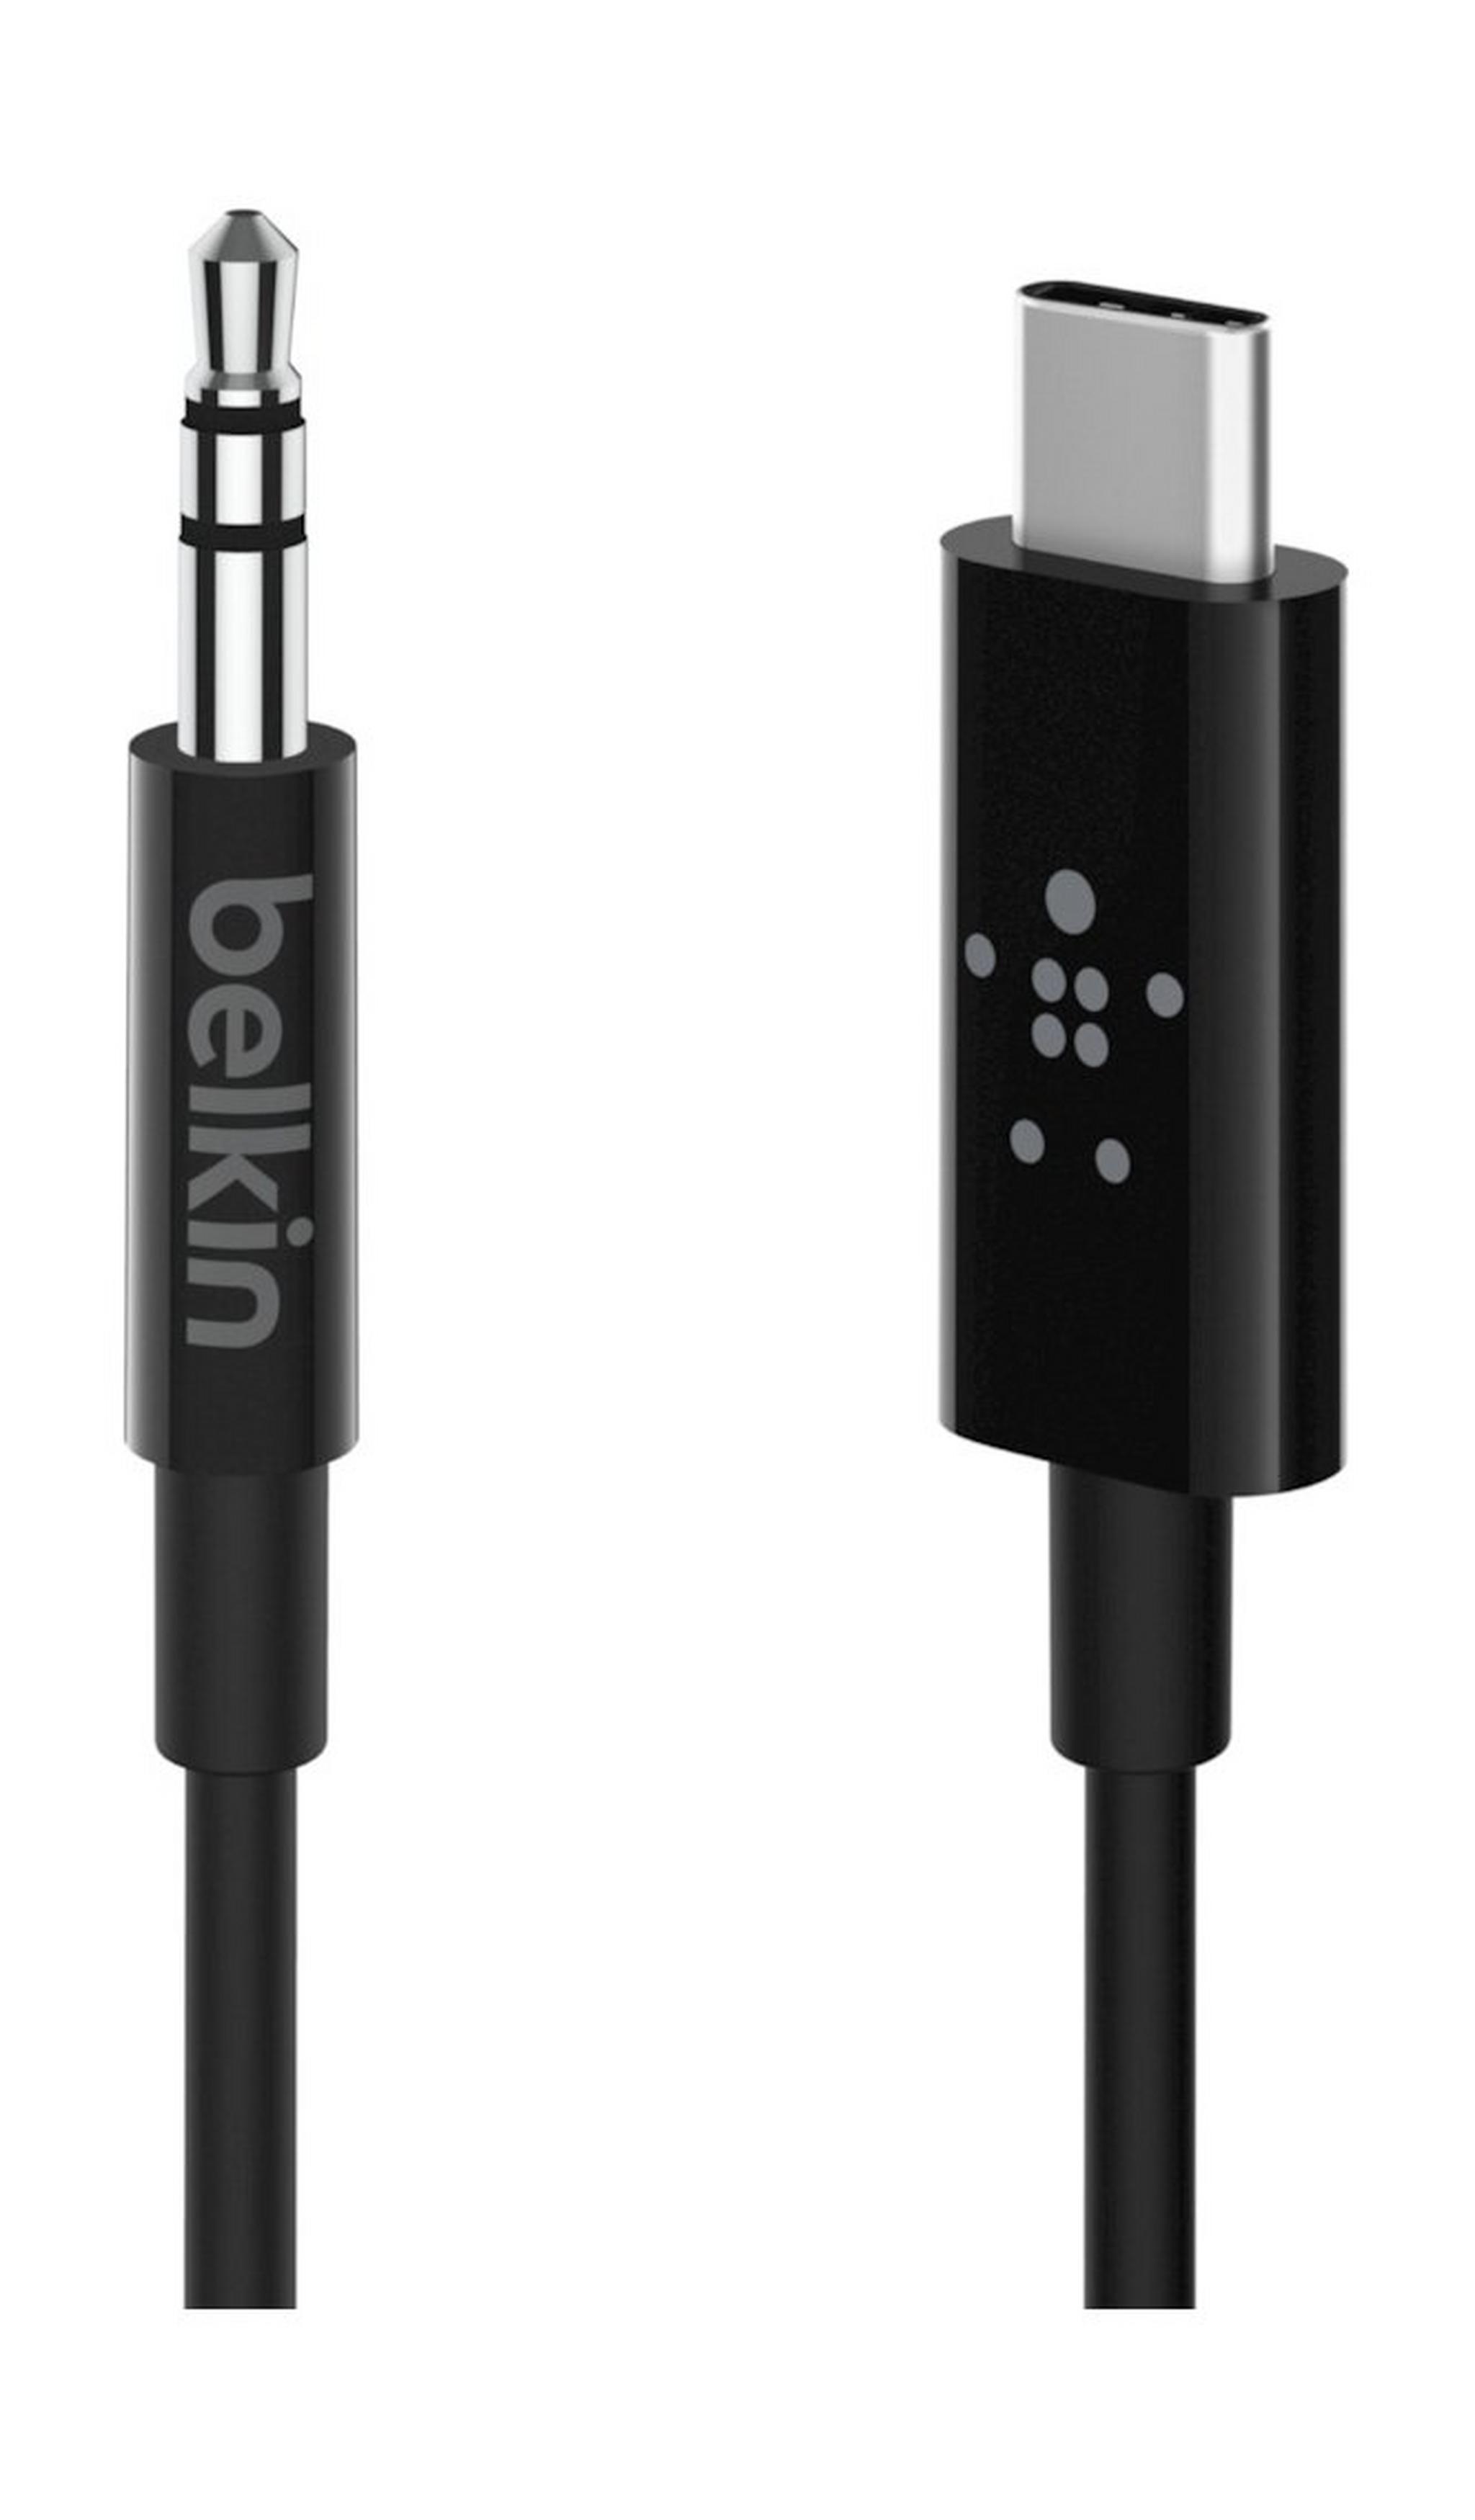 Belkin RockStar 3.5mm Audio Cable with USB-C Connector - Black